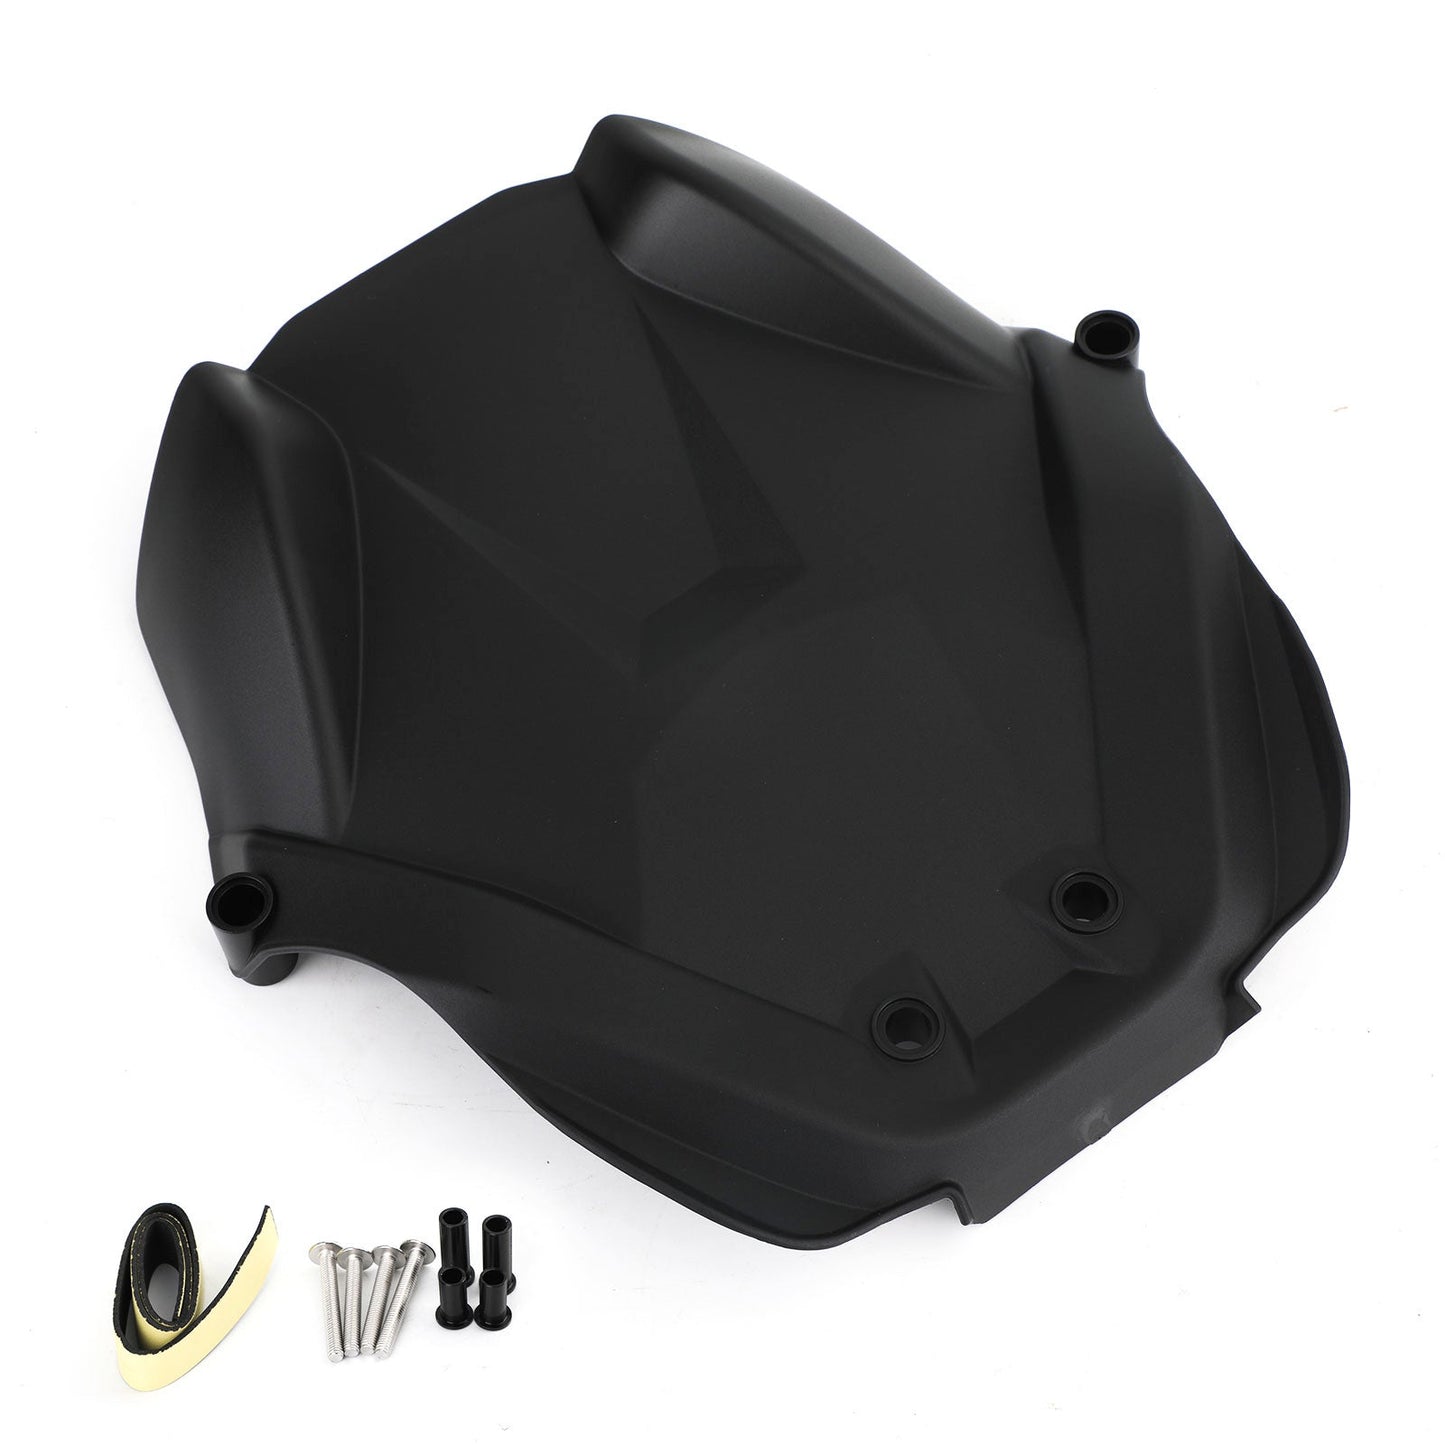 Front Clutch Engine Guard Stator Cover Case For BMW R1200GS LC / ADV R1200RT LC R1250R R1250RS R1250RT BLK